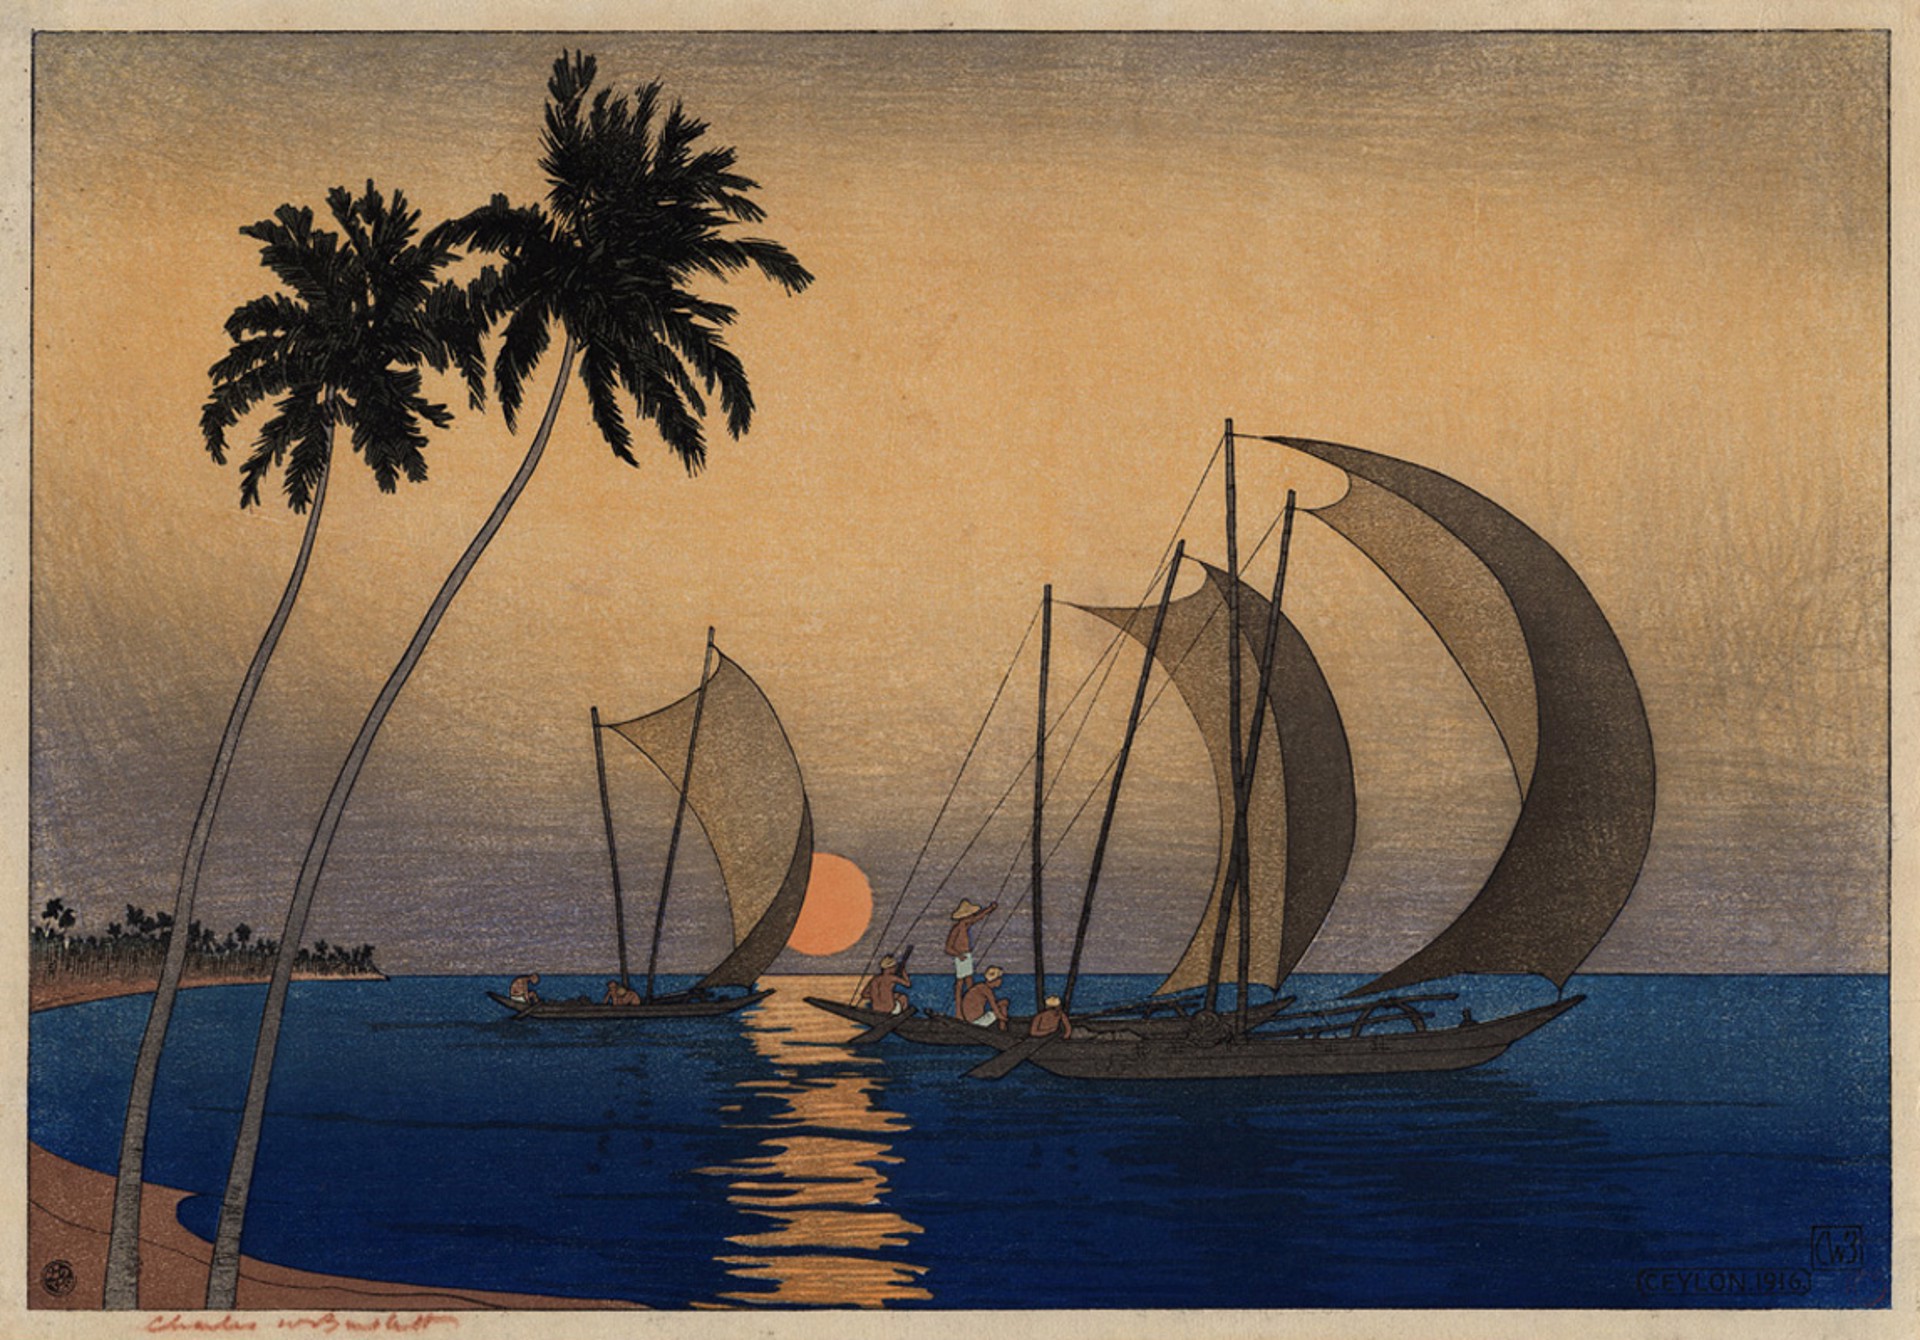 Ceylon (Sea, Sails and Palms) by Charles Bartlett